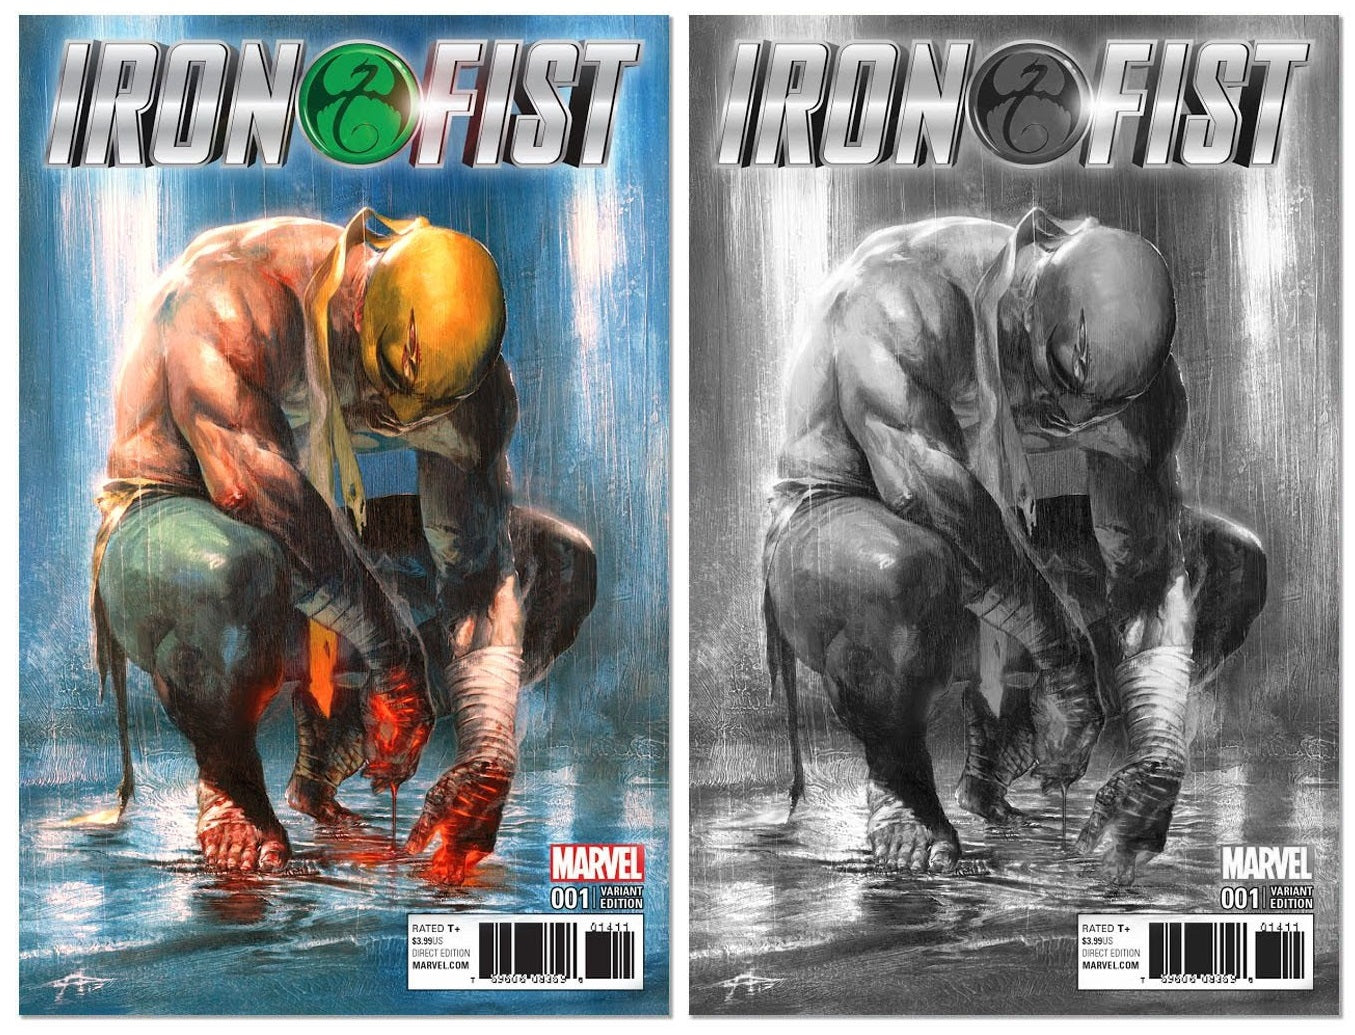 IRON FIST #1 GABRIELE DELL’OTTO VARIANT COLOUR AND B&W LIMITED TO 1500 SETS